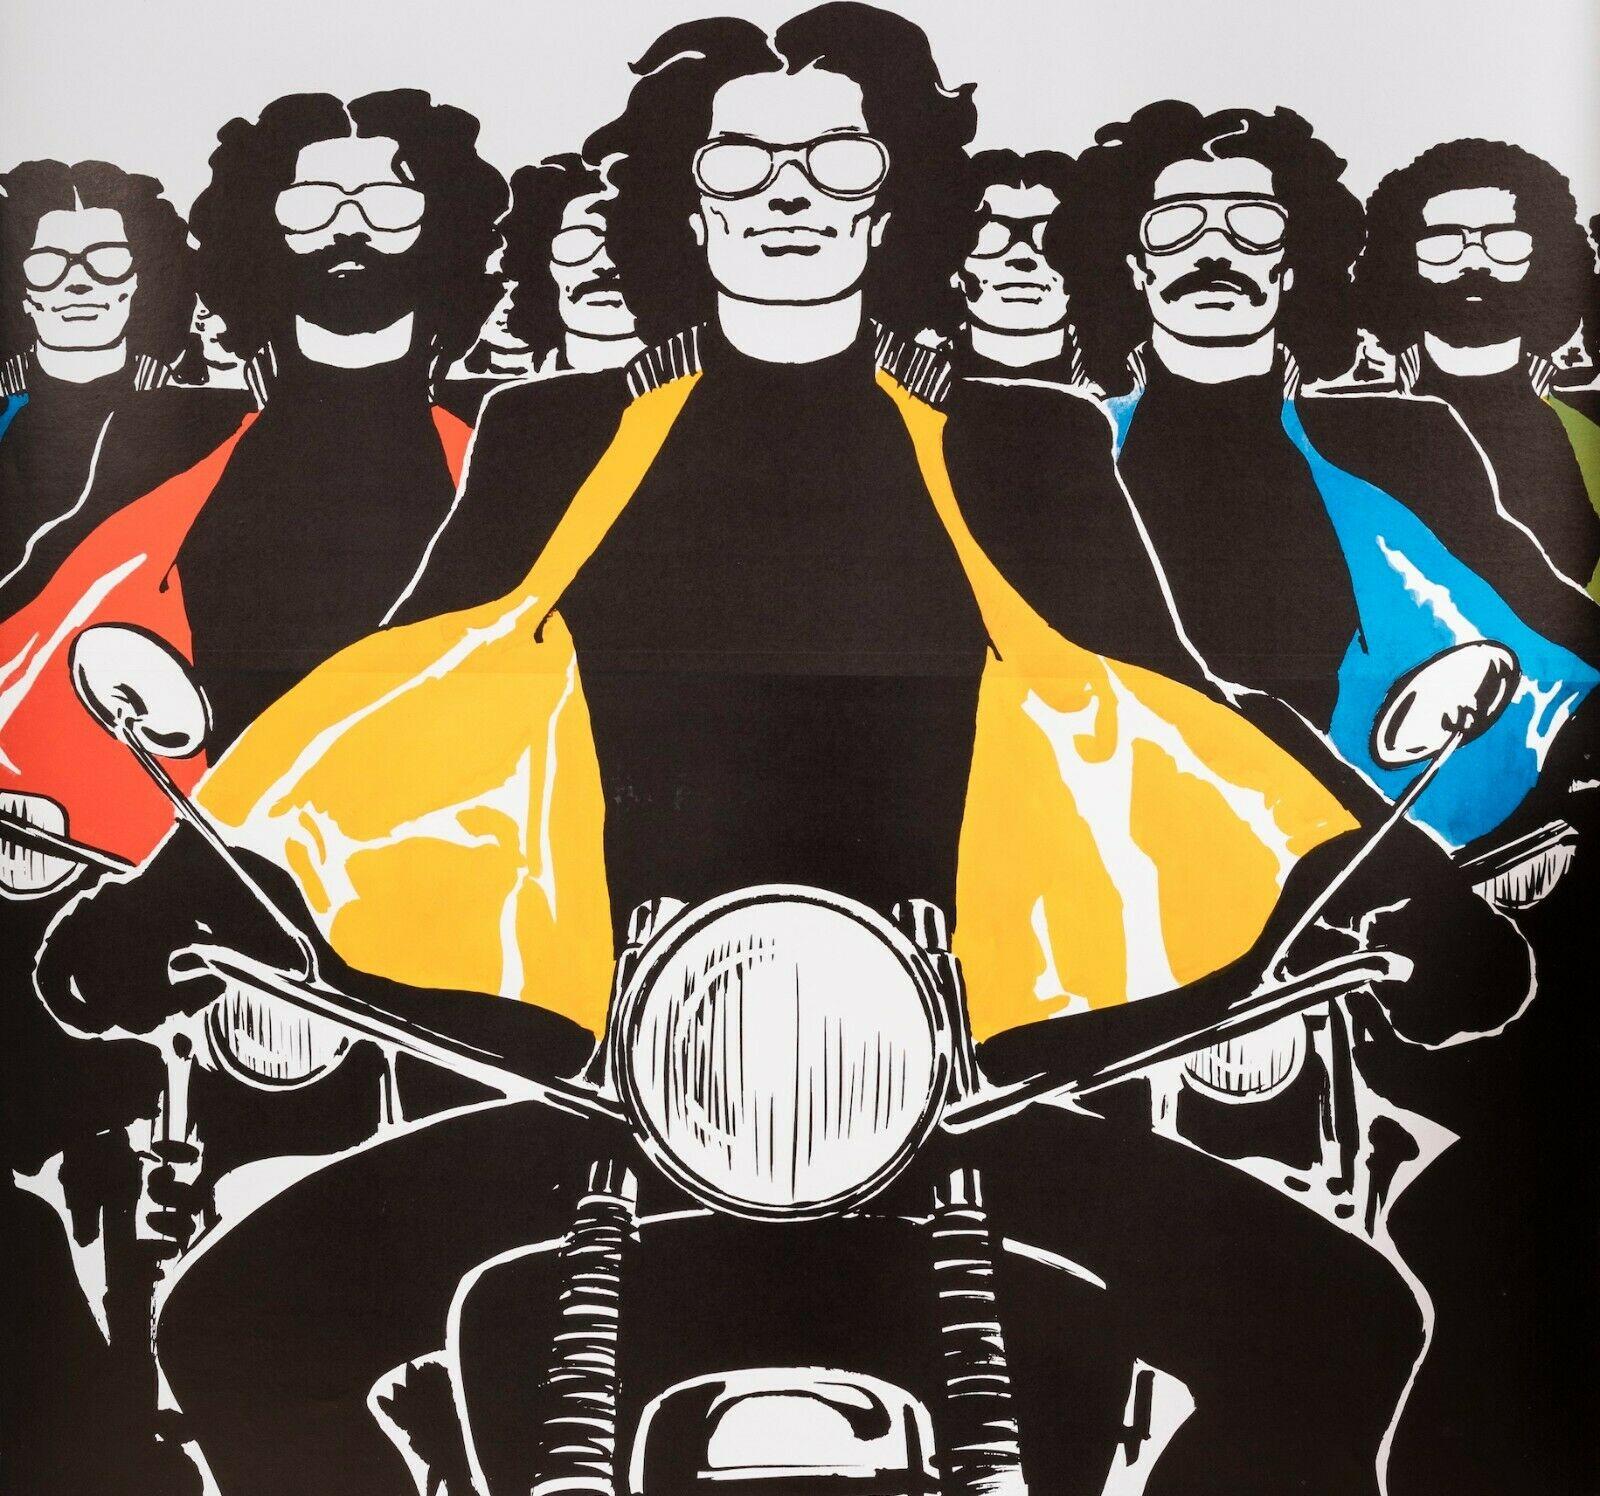 Original Italian Poster-Gruau-Assézat-Fashion, Moto-Vesto, 1980

Poster for the promotion of Bemberg by motorcyclists.
The poster represents of men on their motorcycle carrying jackets doubled with Bemberg and the different colour available.